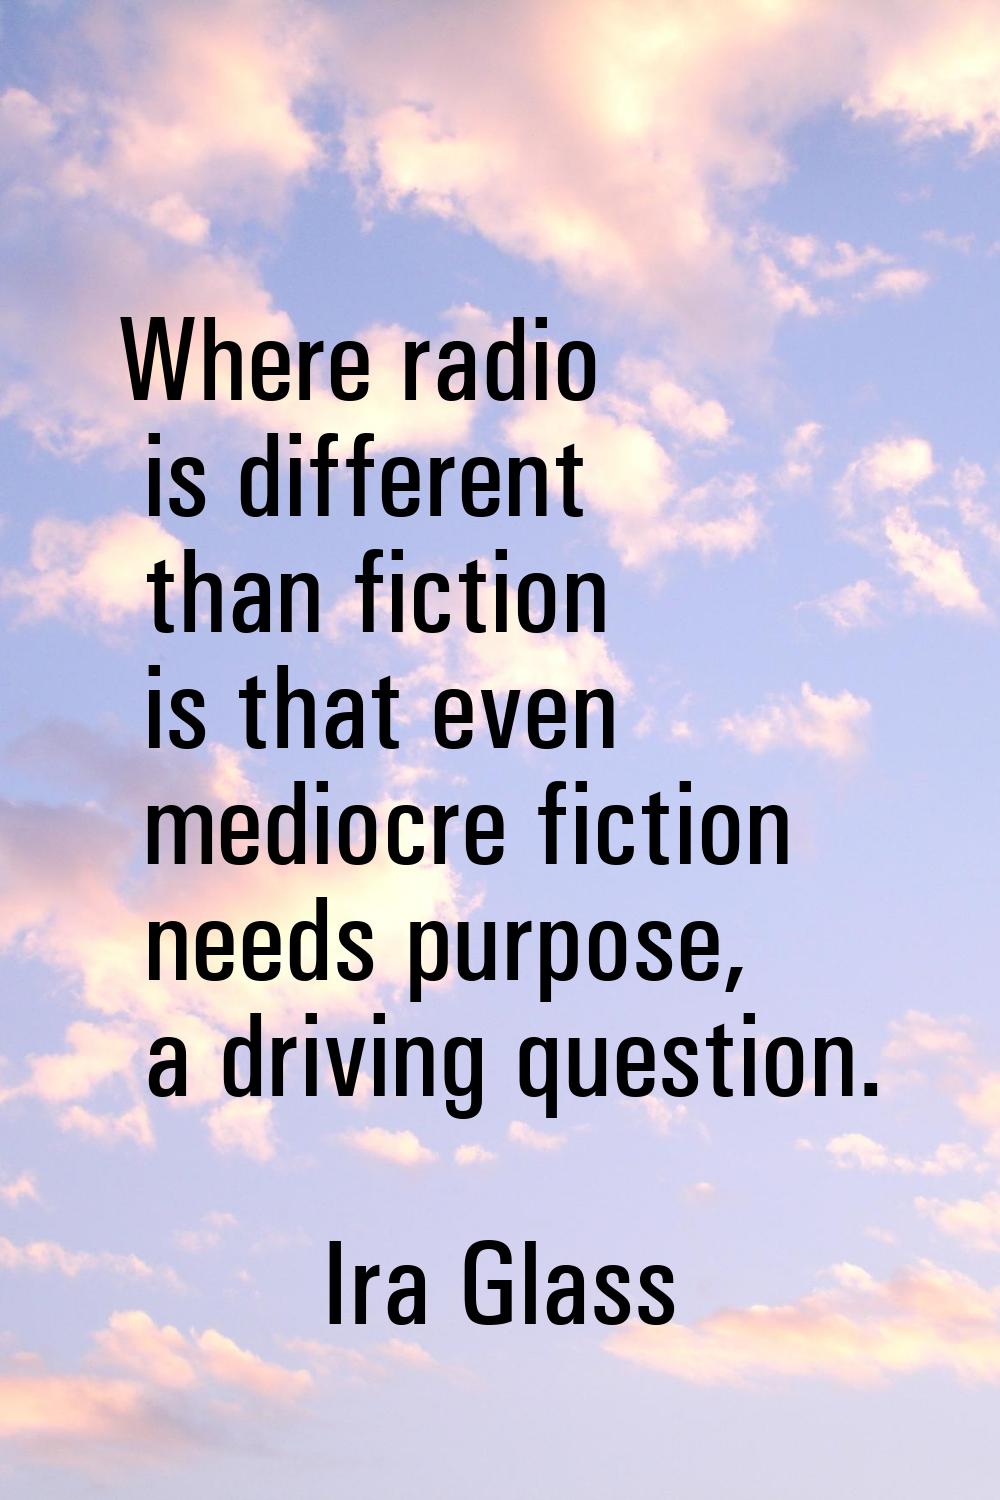 Where radio is different than fiction is that even mediocre fiction needs purpose, a driving questi